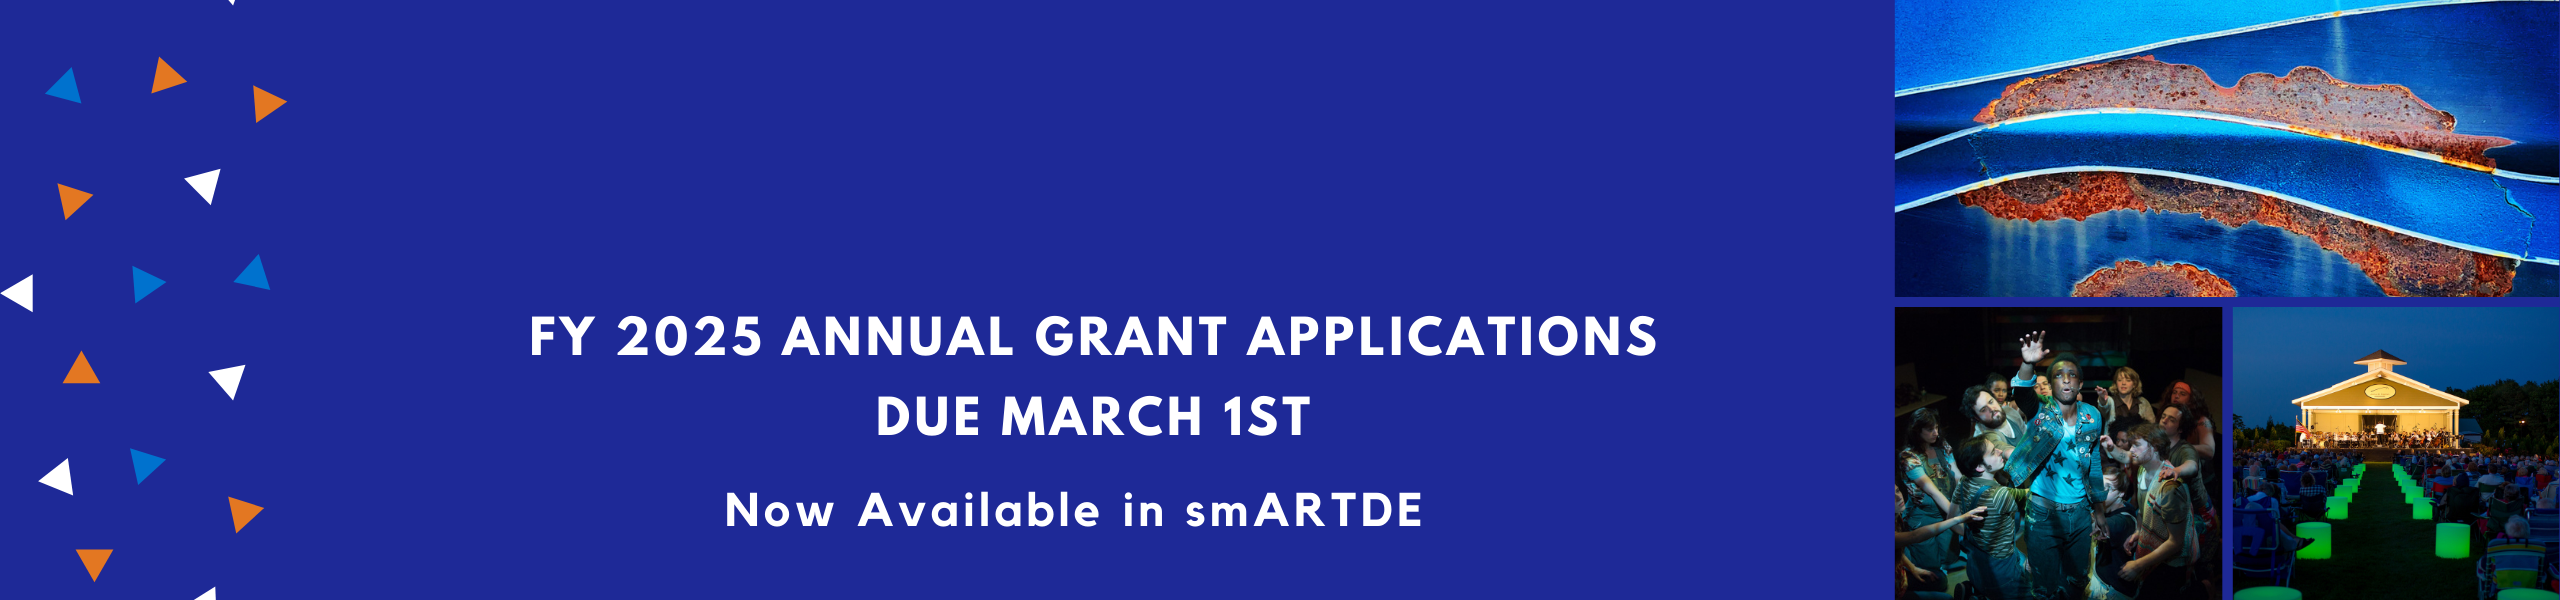 Annual grant applications now being accepted